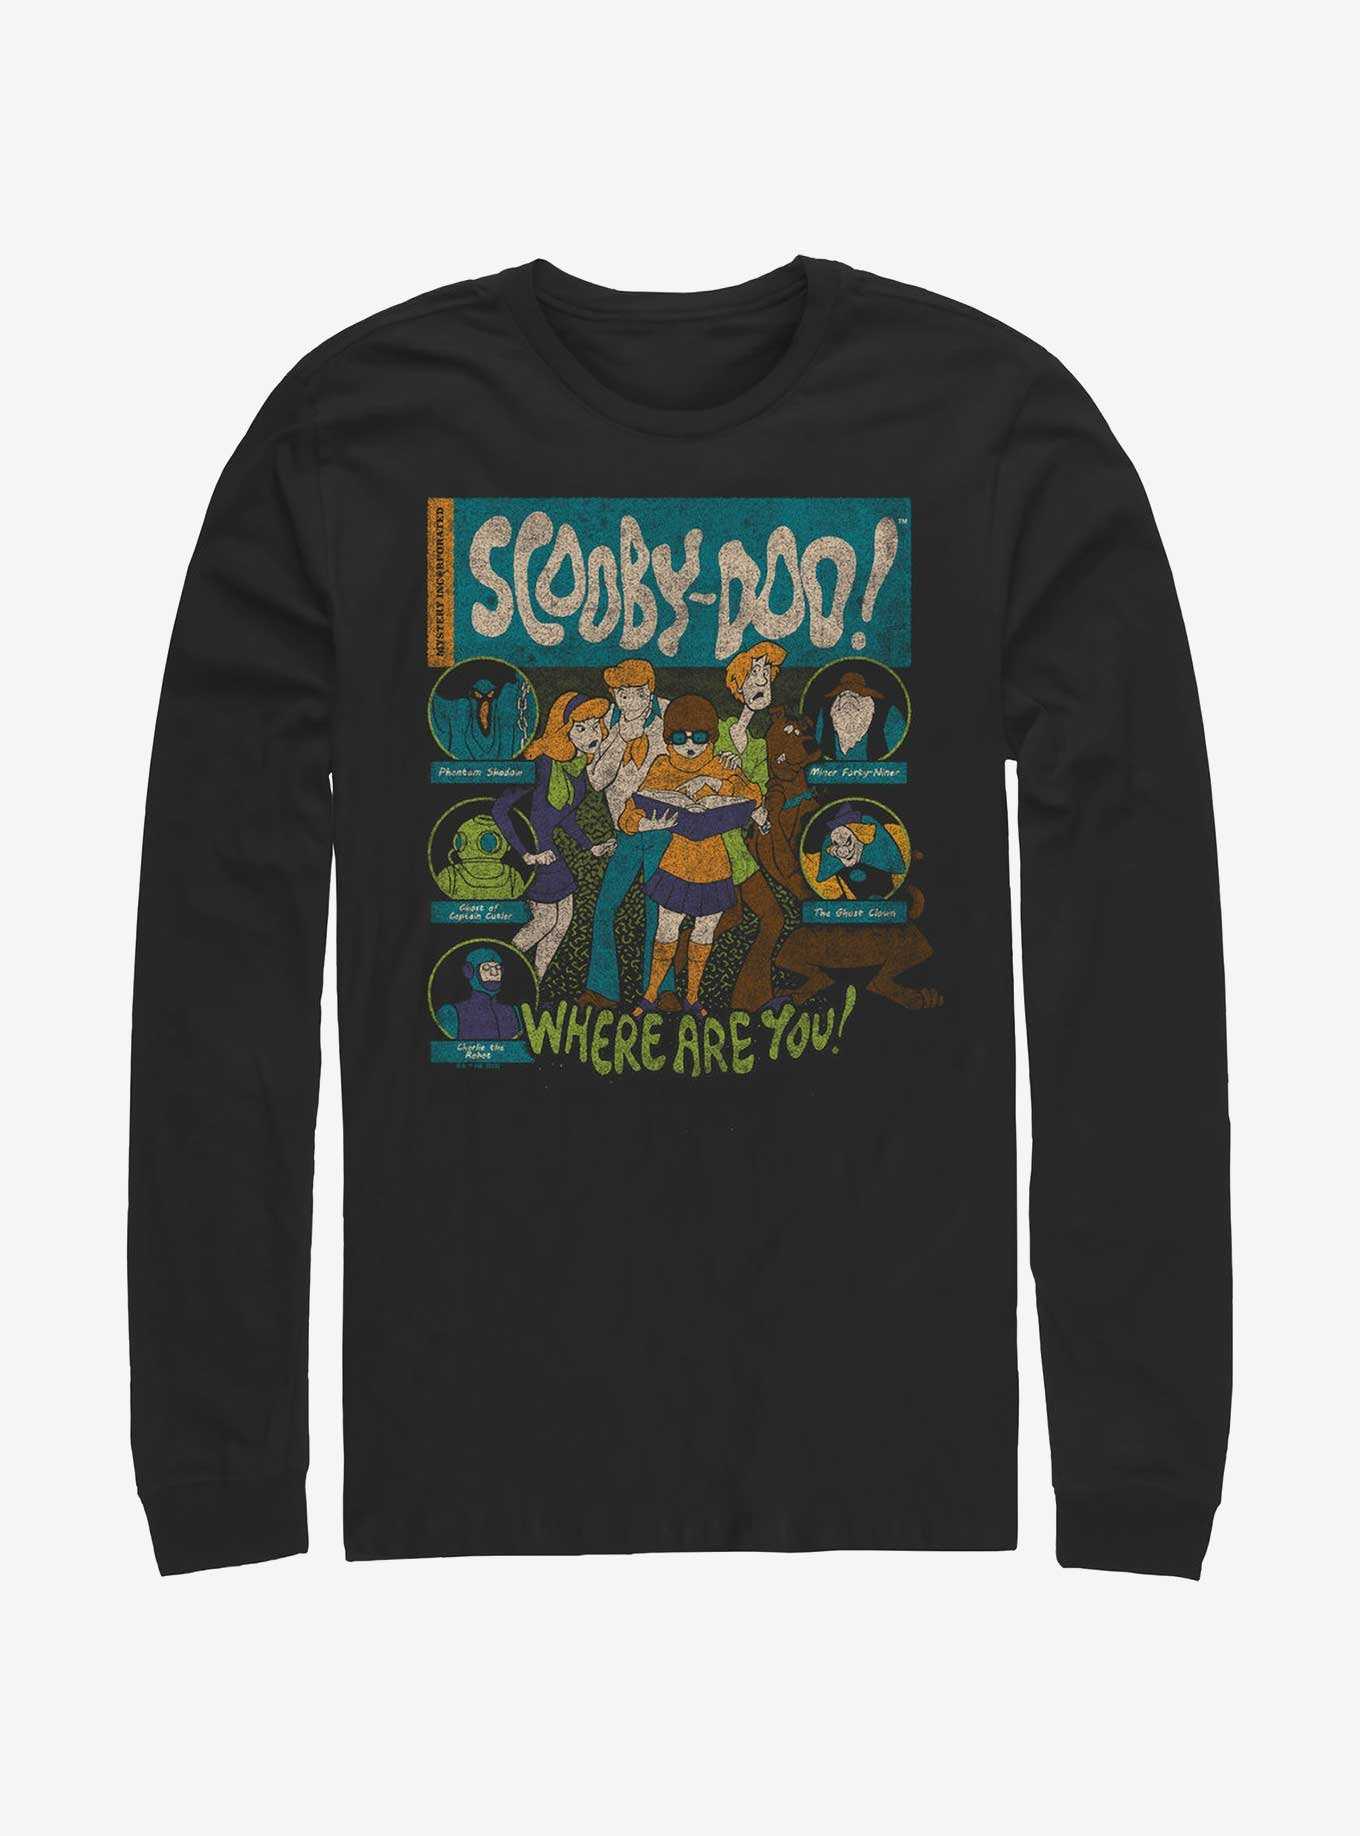 Scooby MOO Adult T